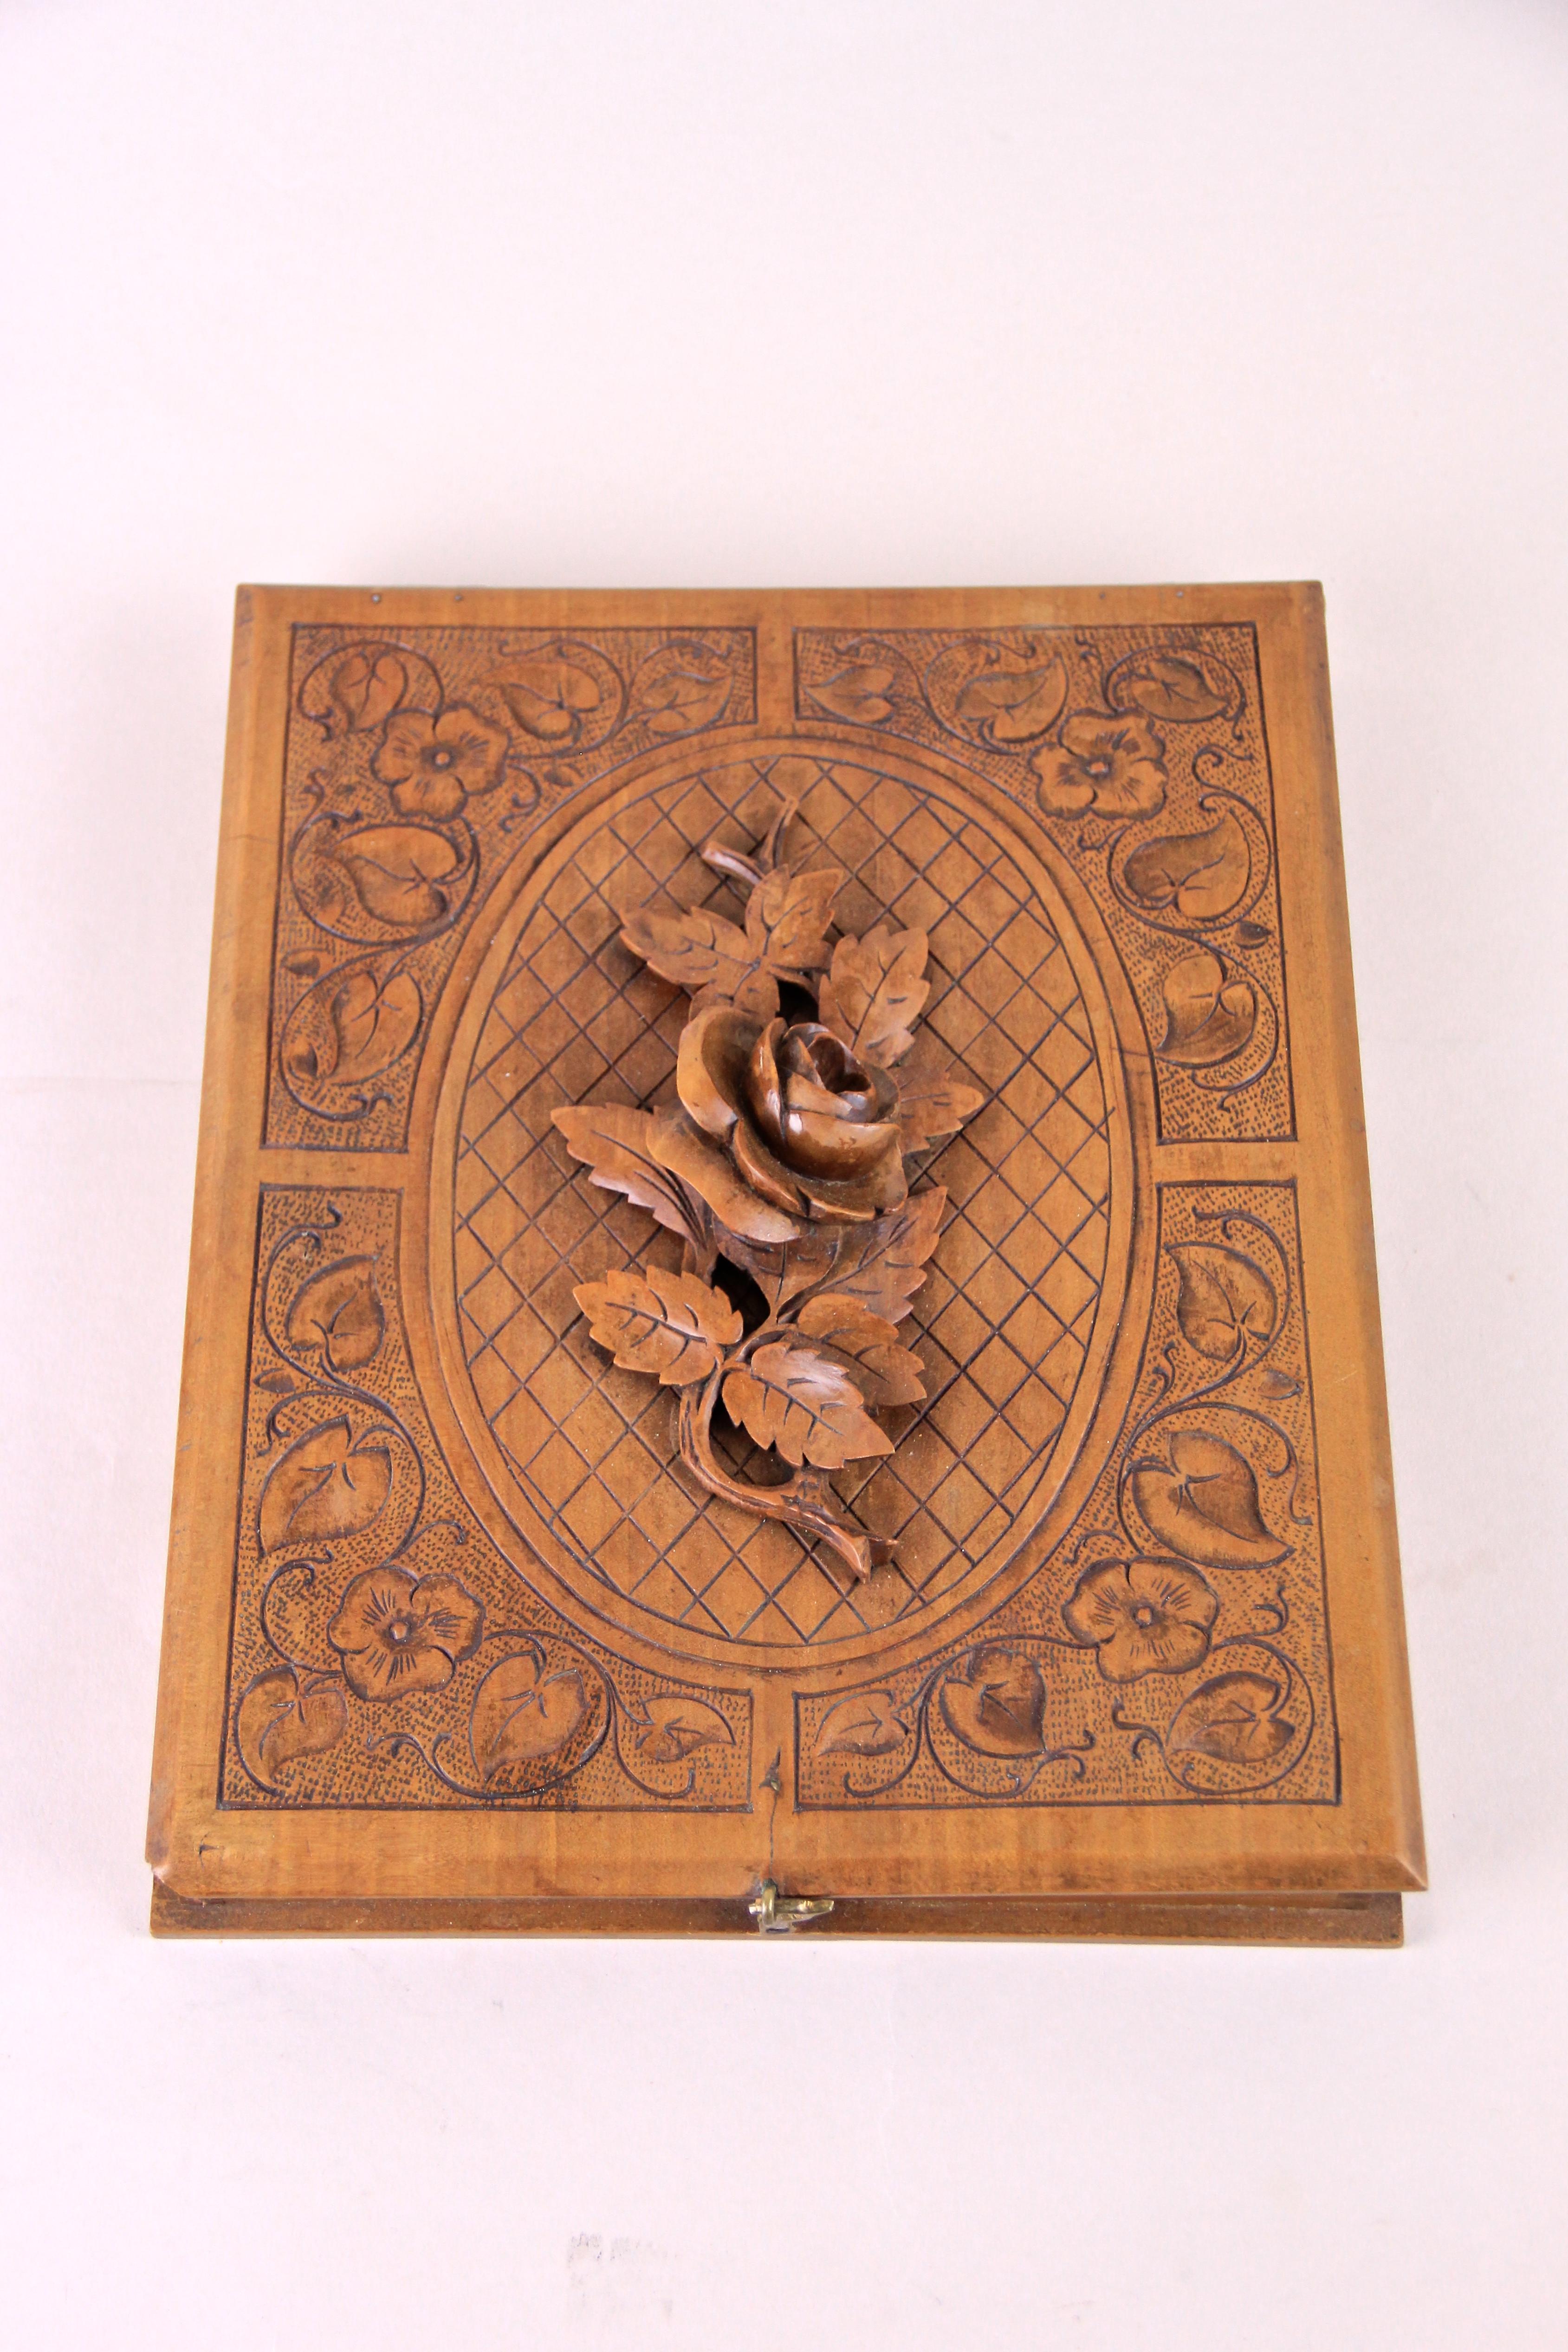 Enchanting cigar box from the early 20th century. Made out of fine cherrywood this lovely cigar box shows a fantastic design with a gorgeous carved cover. The absolute highlight of this decorative wooden box builds the elaborately hand-carved rose